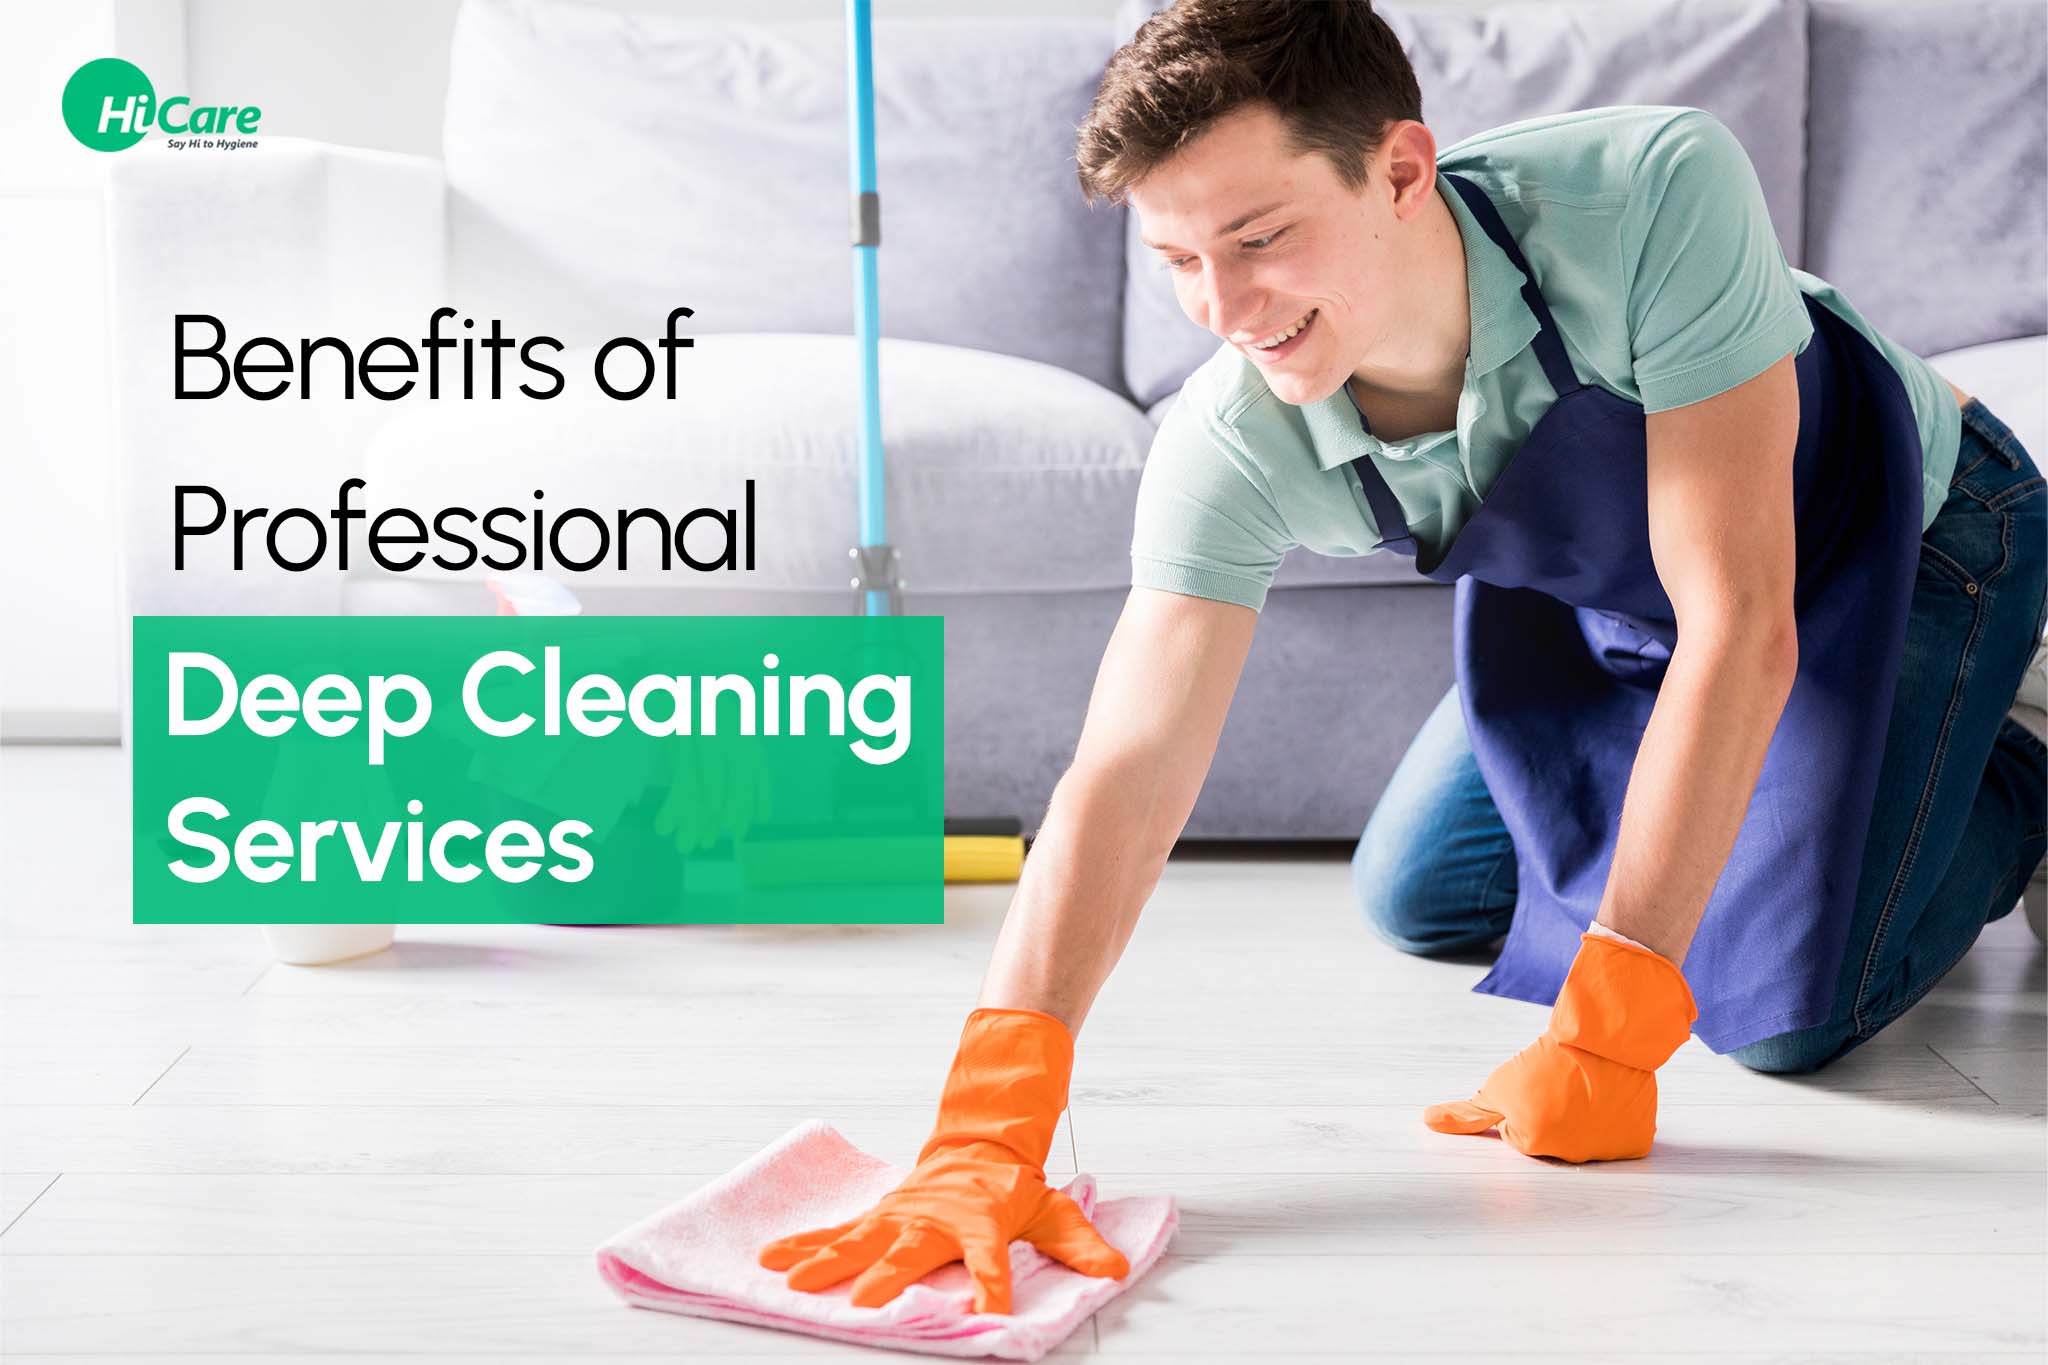 Home Cleaning Archives - Blogs on Pest Control Treatments, Home